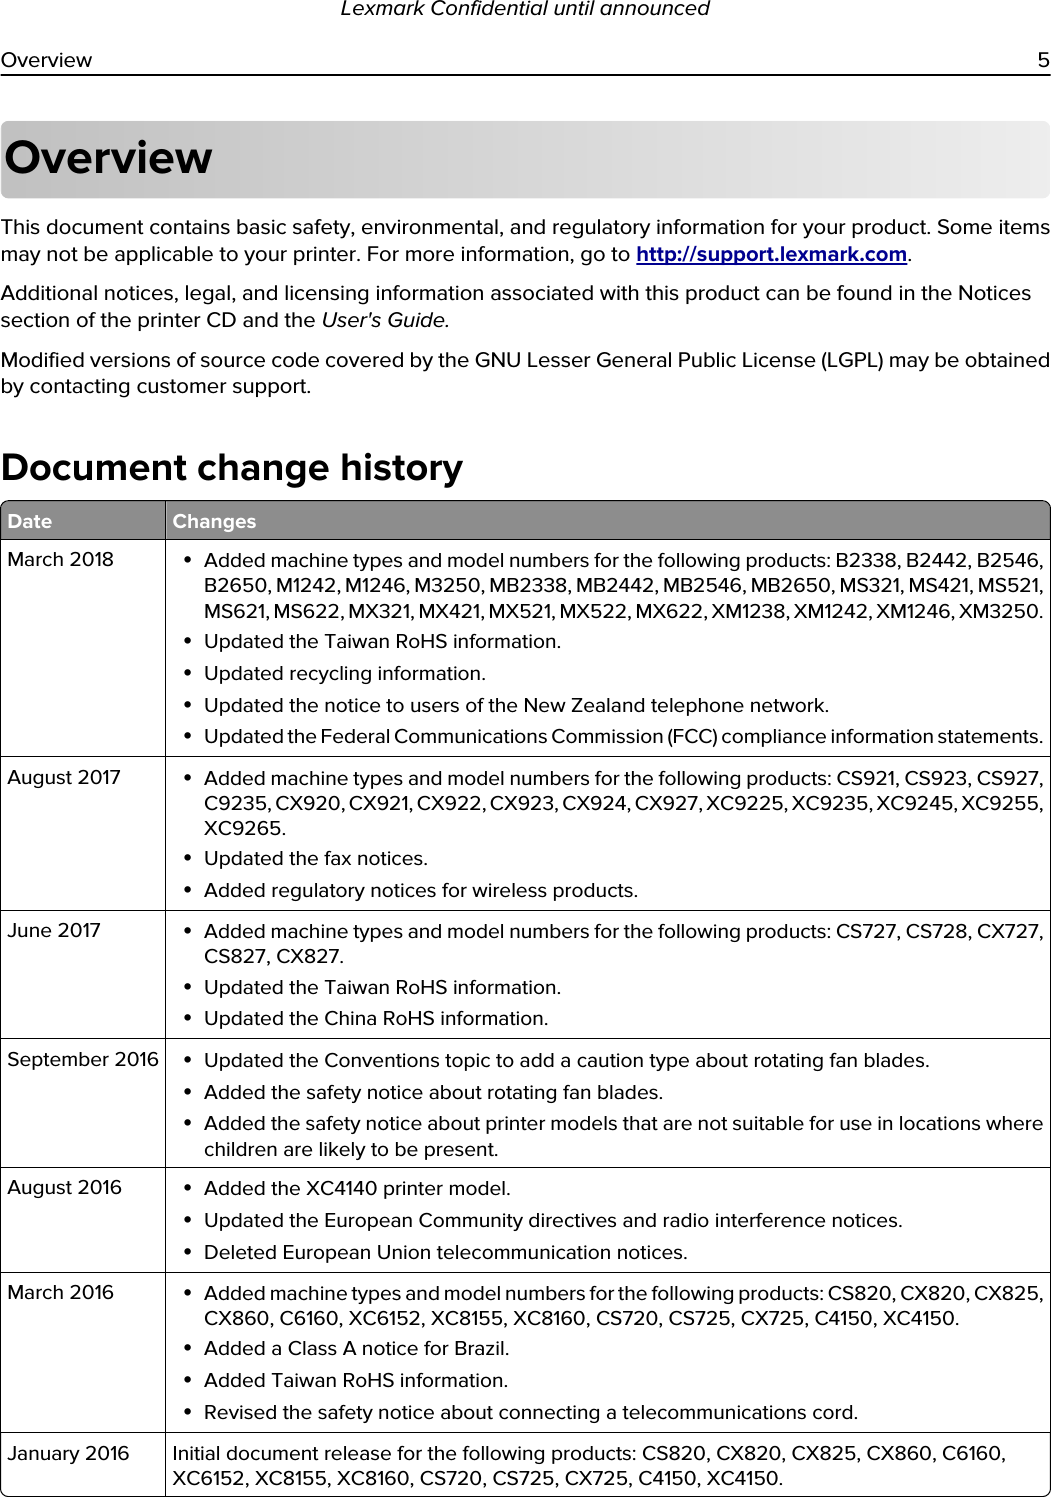 OverviewThis document contains basic safety, environmental, and regulatory information for your product. Some items may not be applicable to your printer. For more information, go to http://support.lexmark.com.Additional notices, legal, and licensing information associated with this product can be found in the Notices section of the printer CD and the User&apos;s Guide.Modified versions of source code covered by the GNU Lesser General Public License (LGPL) may be obtained by contacting customer support.Document change historyDate ChangesMarch 2018 •Added machine types and model numbers for the following products: B2338, B2442, B2546, B2650, M1242, M1246, M3250, MB2338, MB2442, MB2546, MB2650, MS321, MS421, MS521, MS621, MS622, MX321, MX421, MX521, MX522, MX622, XM1238, XM1242, XM1246, XM3250.•Updated the Taiwan RoHS information.•Updated recycling information.•Updated the notice to users of the New Zealand telephone network.•Updated the Federal Communications Commission (FCC) compliance information statements.August 2017 •Added machine types and model numbers for the following products: CS921, CS923, CS927, C9235, CX920, CX921, CX922, CX923, CX924, CX927, XC9225, XC9235, XC9245, XC9255, XC9265.•Updated the fax notices.•Added regulatory notices for wireless products.June 2017 •Added machine types and model numbers for the following products: CS727, CS728, CX727, CS827, CX827.•Updated the Taiwan RoHS information.•Updated the China RoHS information.September 2016 •Updated the Conventions topic to add a caution type about rotating fan blades.•Added the safety notice about rotating fan blades.•Added the safety notice about printer models that are not suitable for use in locations where children are likely to be present.August 2016 •Added the XC4140 printer model.•Updated the European Community directives and radio interference notices.•Deleted European Union telecommunication notices.March 2016 •Added machine types and model numbers for the following products: CS820, CX820, CX825, CX860, C6160, XC6152, XC8155, XC8160, CS720, CS725, CX725, C4150, XC4150.•Added a Class A notice for Brazil.•Added Taiwan RoHS information.•Revised the safety notice about connecting a telecommunications cord.January 2016 Initial document release for the following products: CS820, CX820, CX825, CX860, C6160, XC6152, XC8155, XC8160, CS720, CS725, CX725, C4150, XC4150.Lexmark Confidential until announcedOverview 5